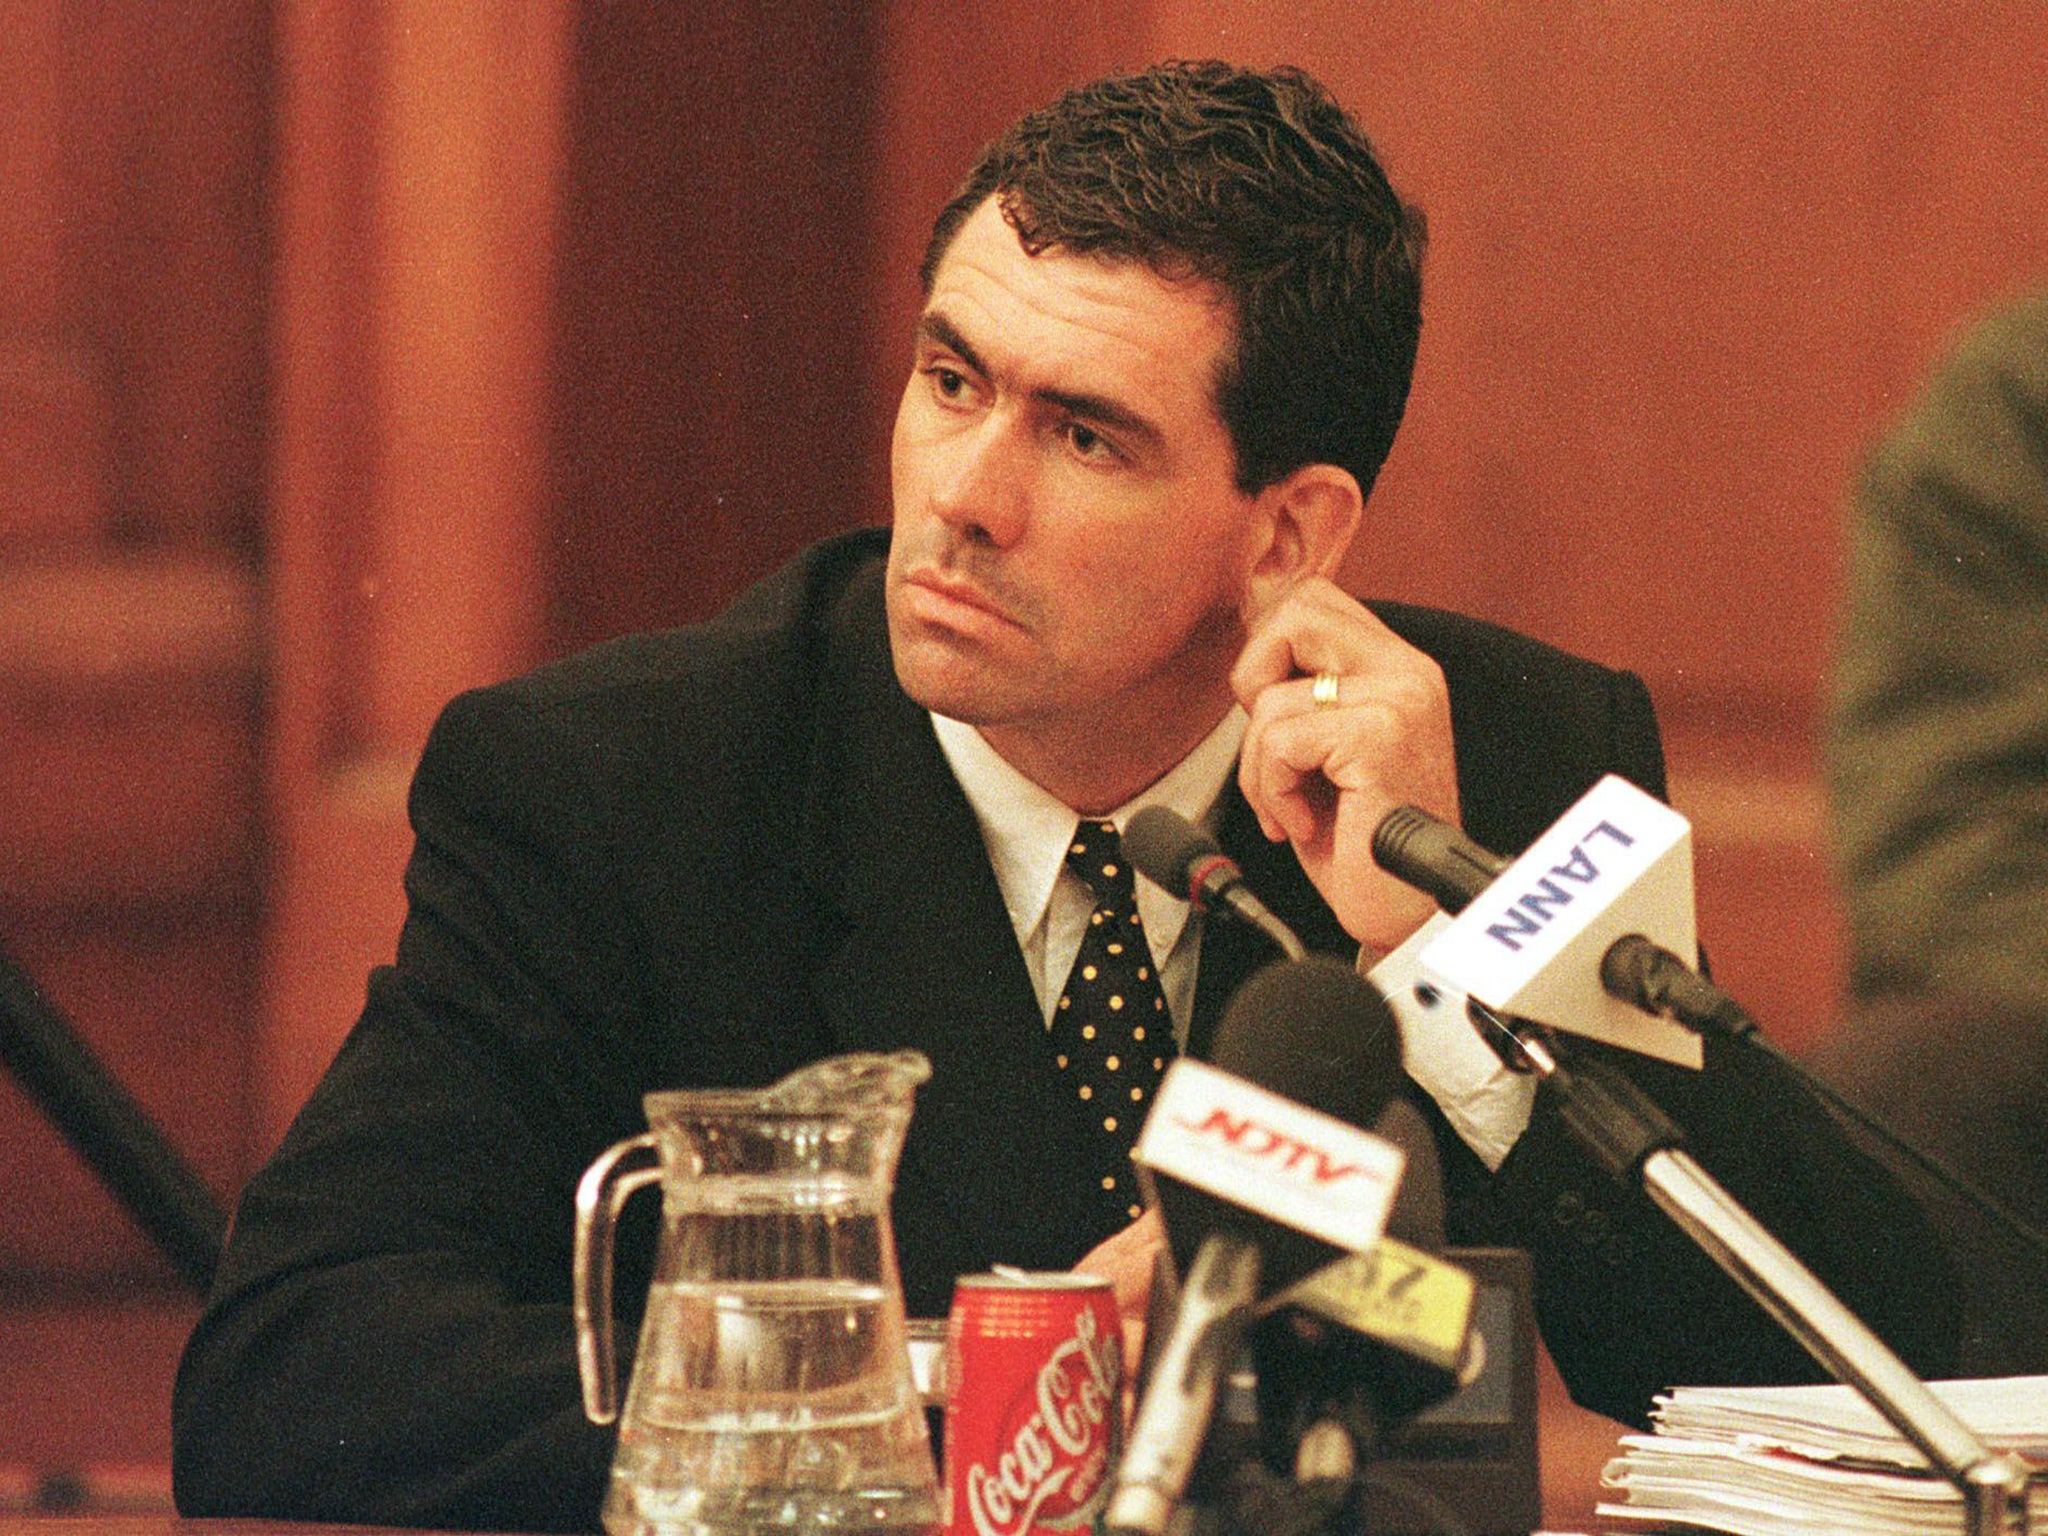 The South Africa captain, Hansie Cronje, has gone down in history as the most notorious match-fixer of all